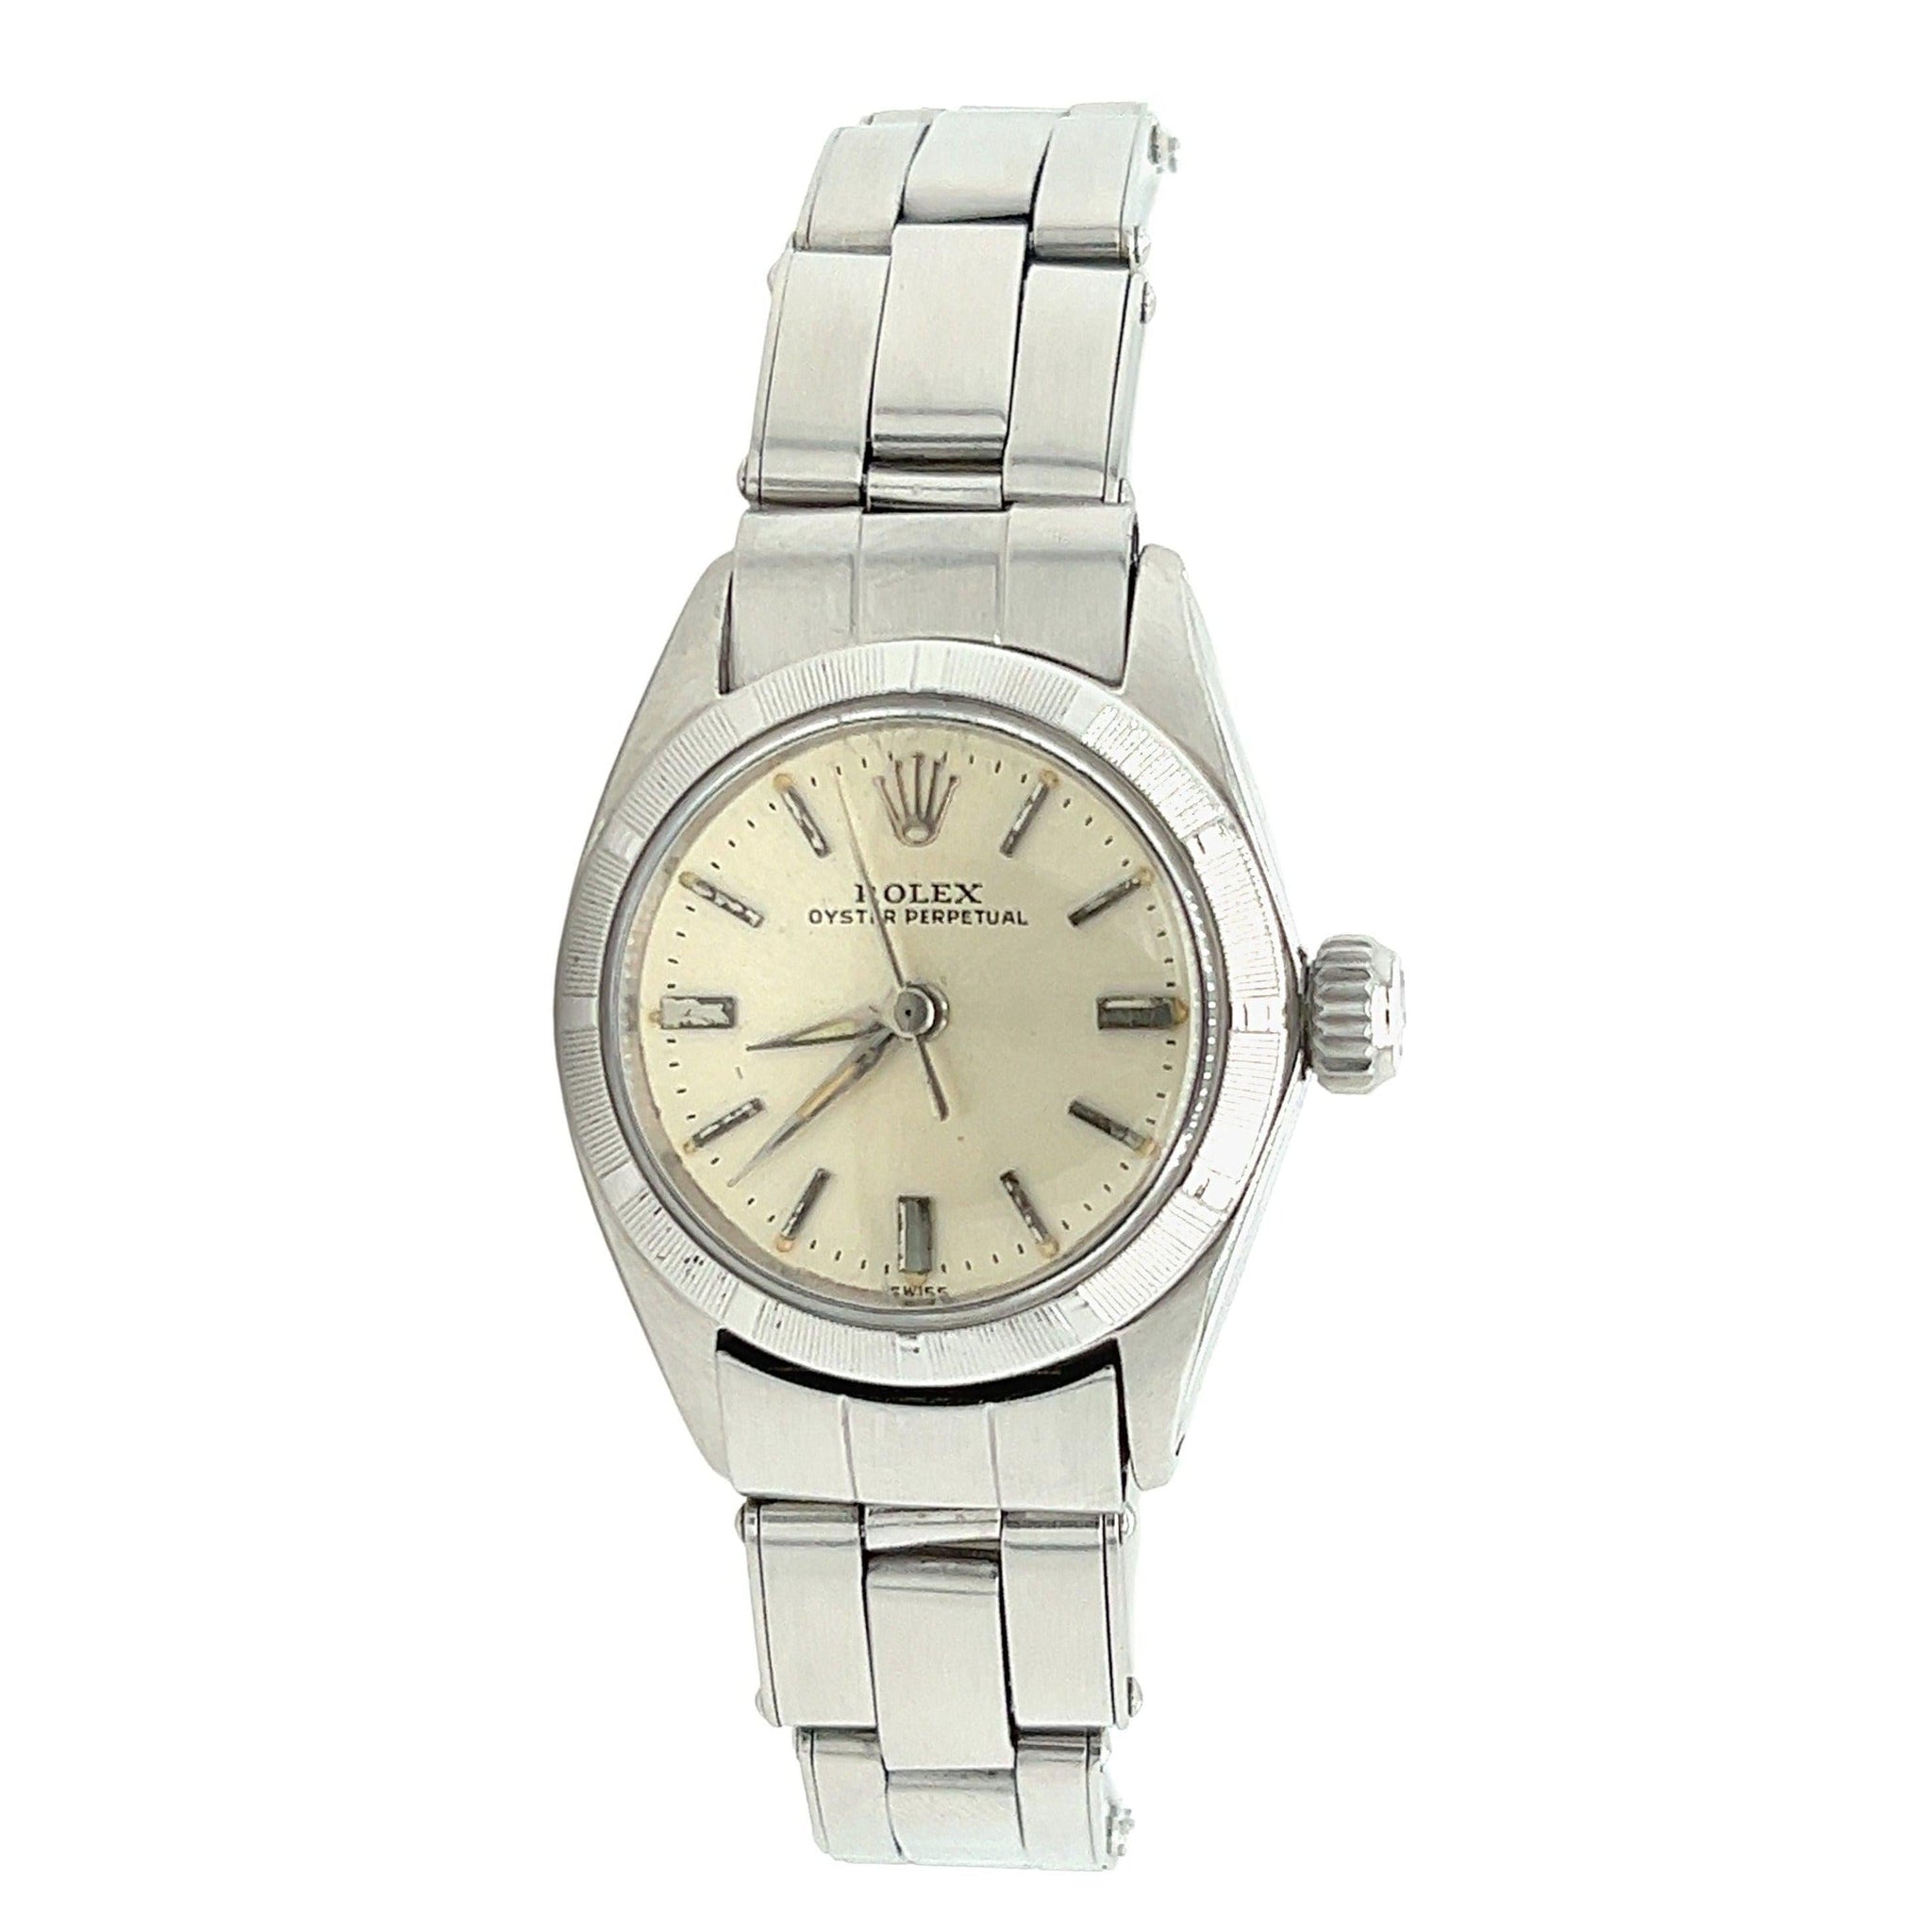 Vintage Rolex Oyster Perpetual 6623 Women's 25mm Dial Watch in Steel-Watches-ASSAY